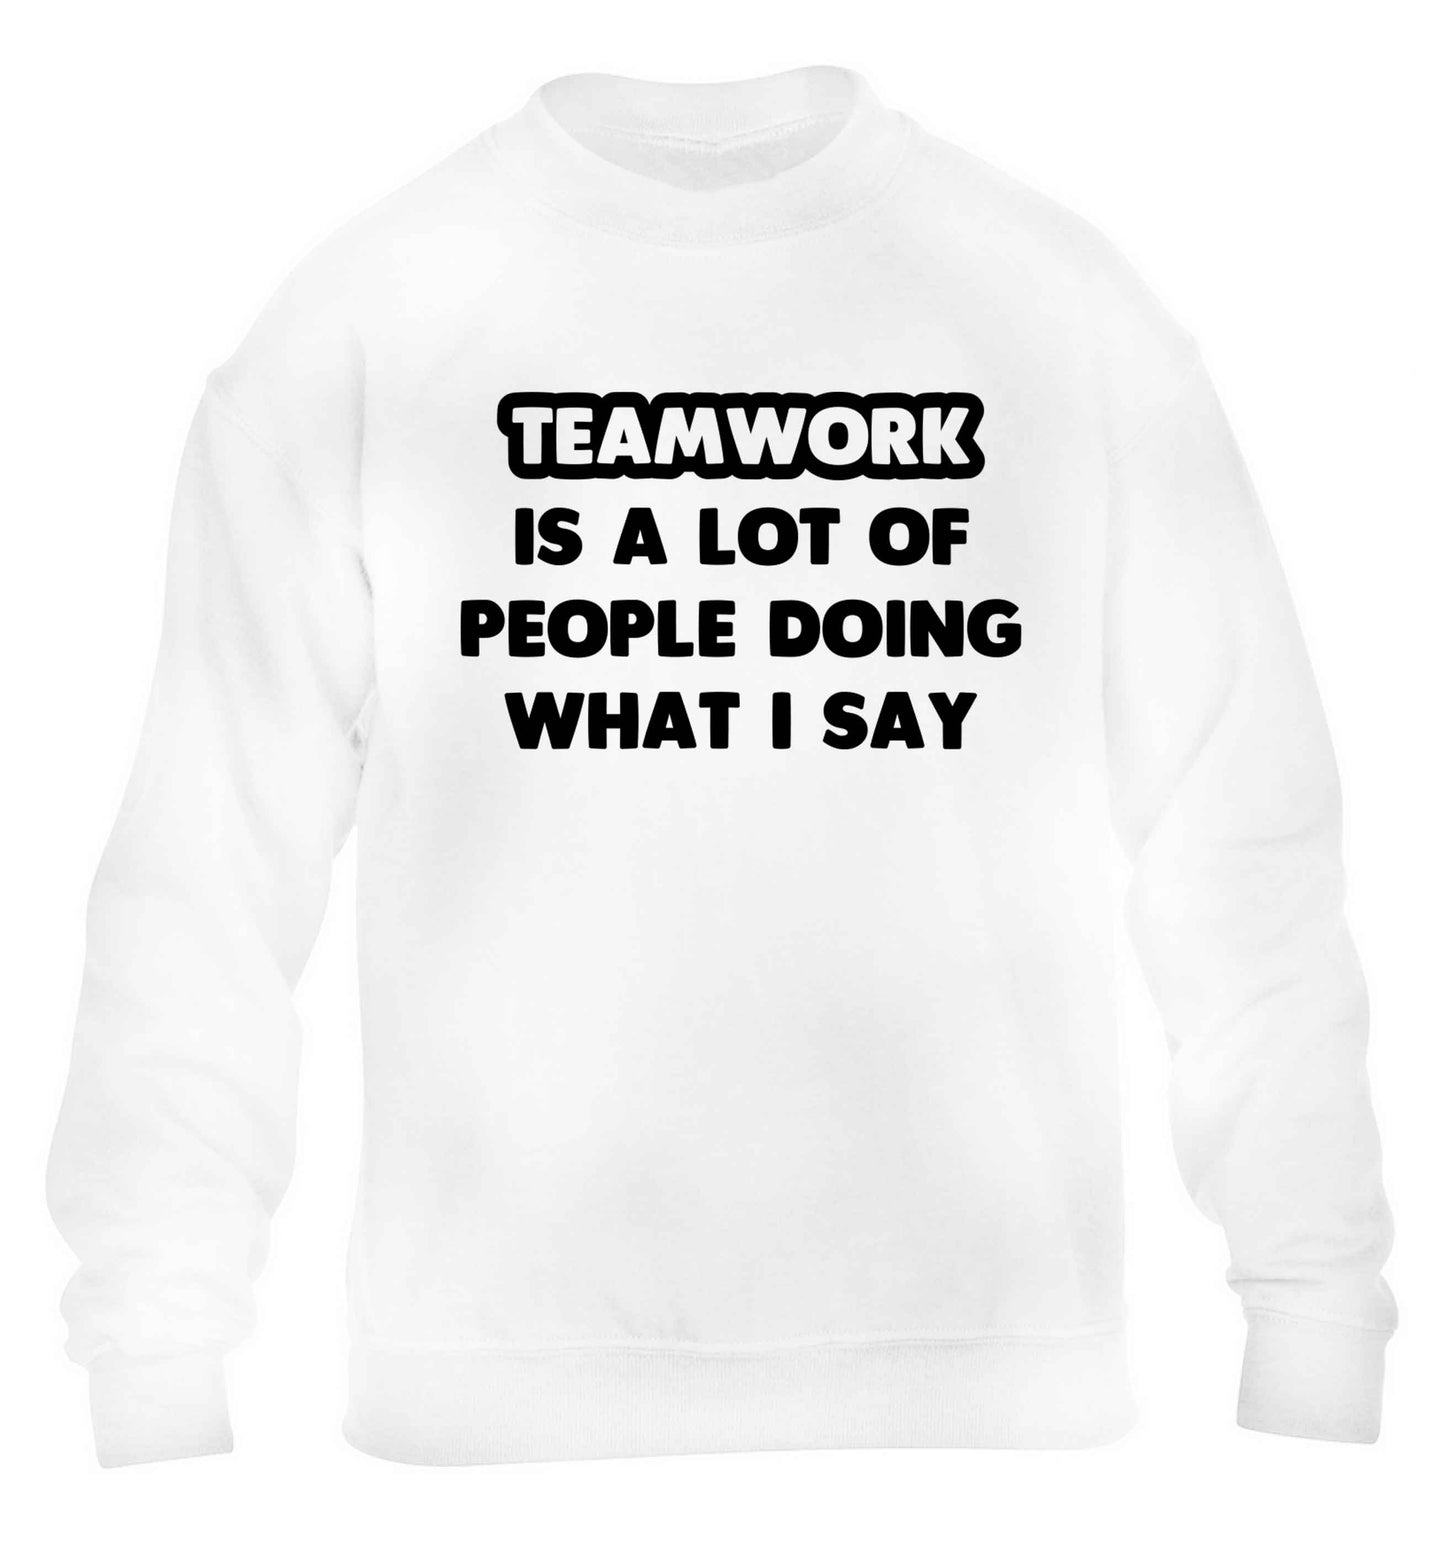 Teamwork is a lot of people doing what I say children's white sweater 12-13 Years